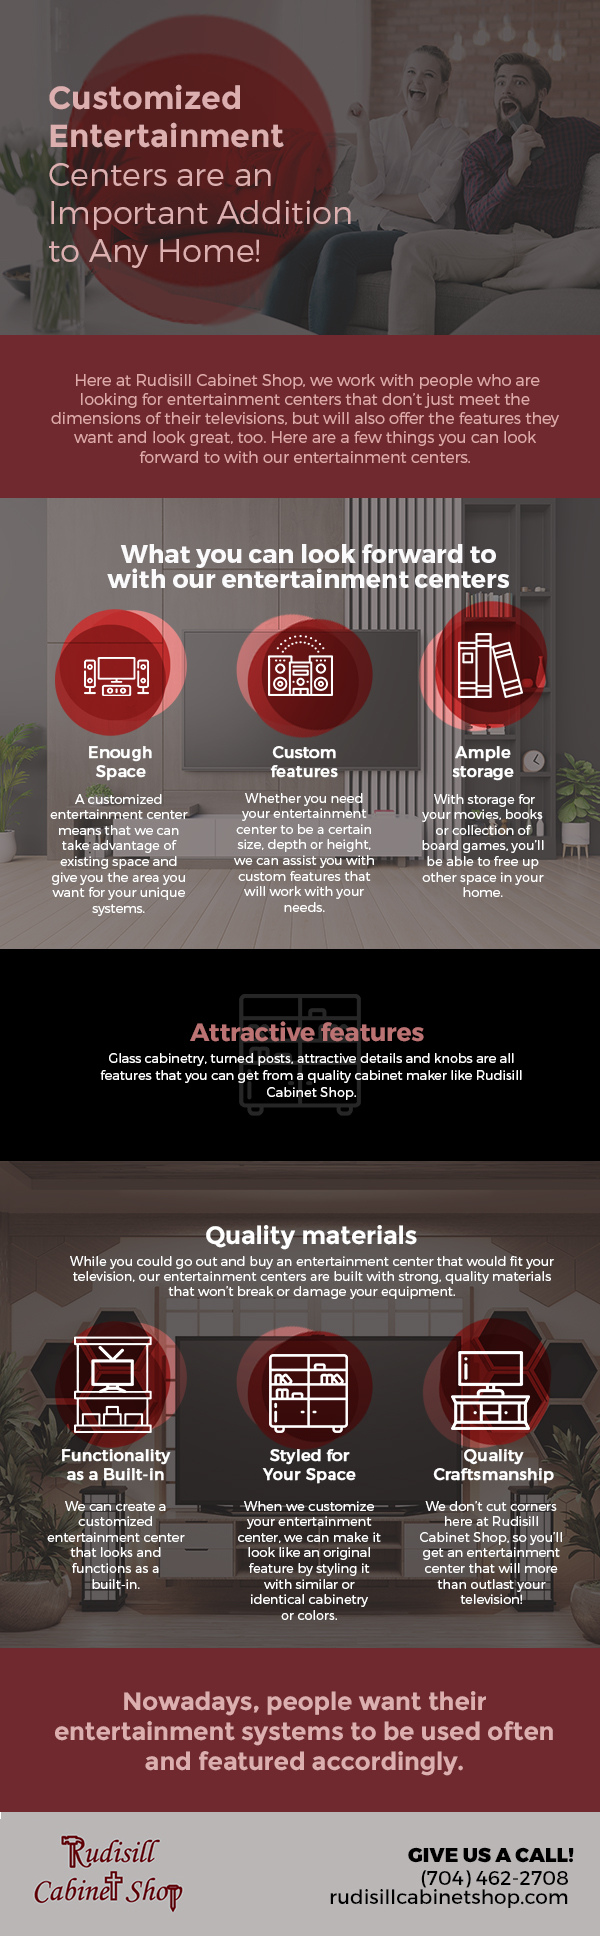 Customized Entertainment Centers are an Important Addition to Any Home! [infographic]